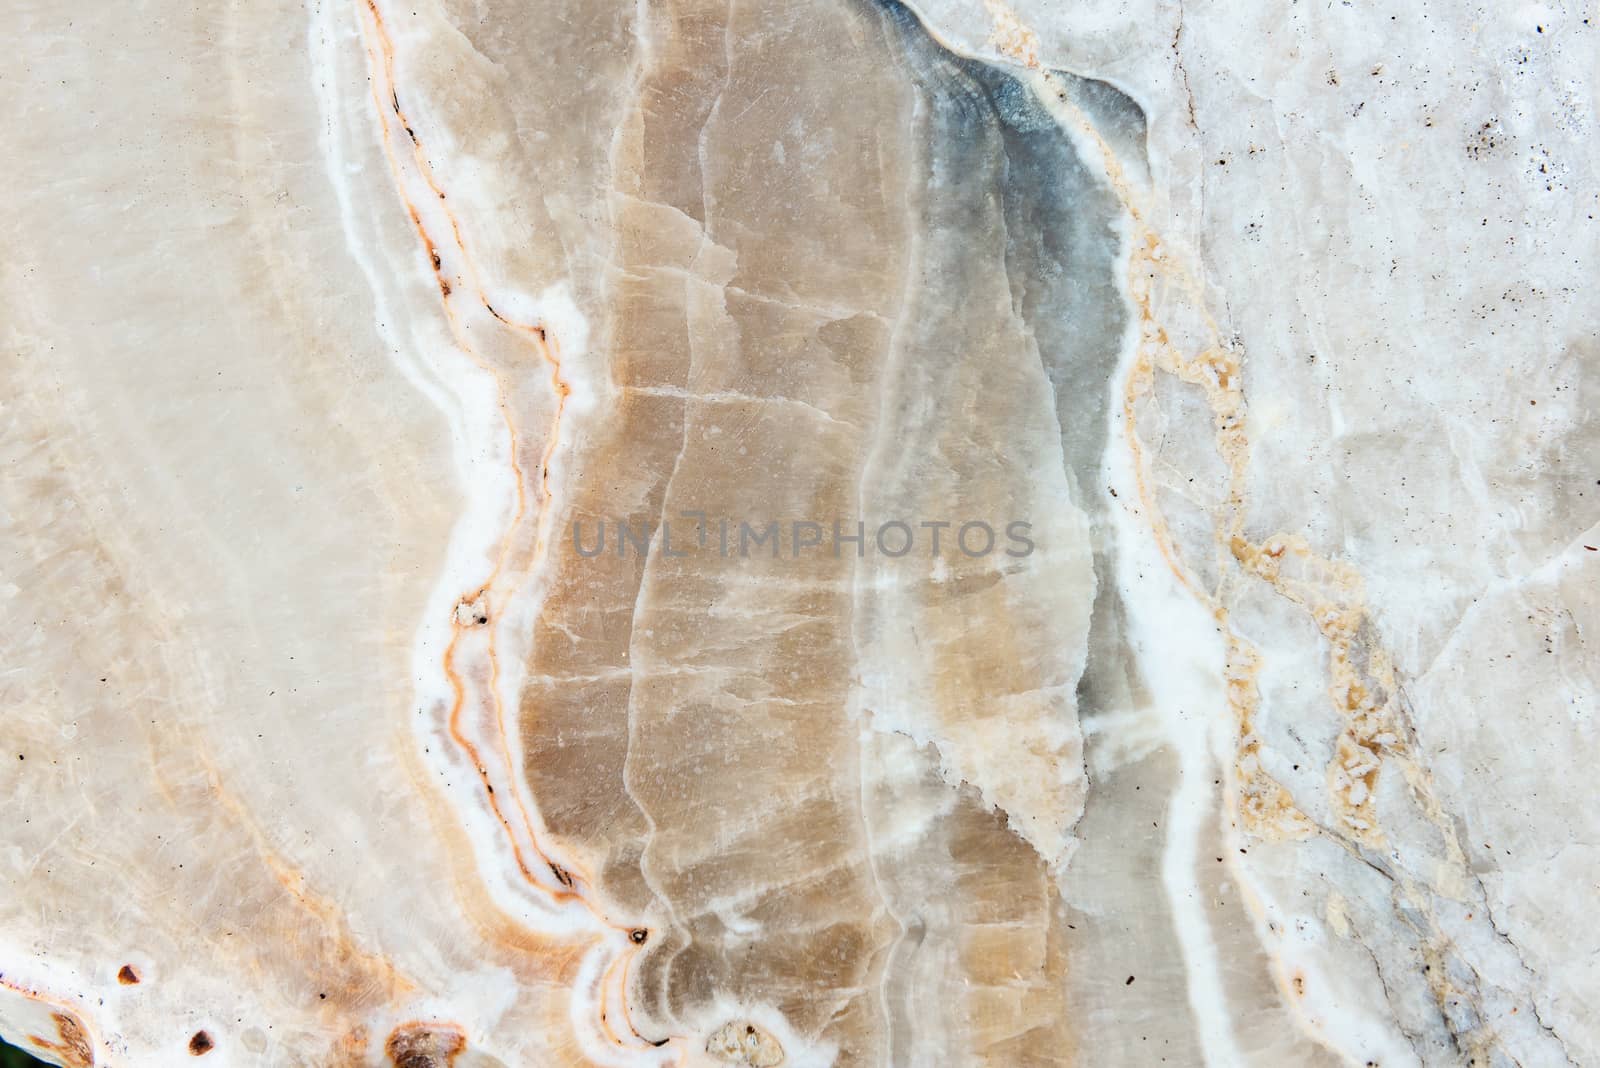 Natural Marble Texture Stone Background, Abstract Granite Pattern of Flooring. Surface Marble Textured Detail of Level Interior Decoration, Home Decorative Design for Architecture Wall and Floor. by MahaHeang245789